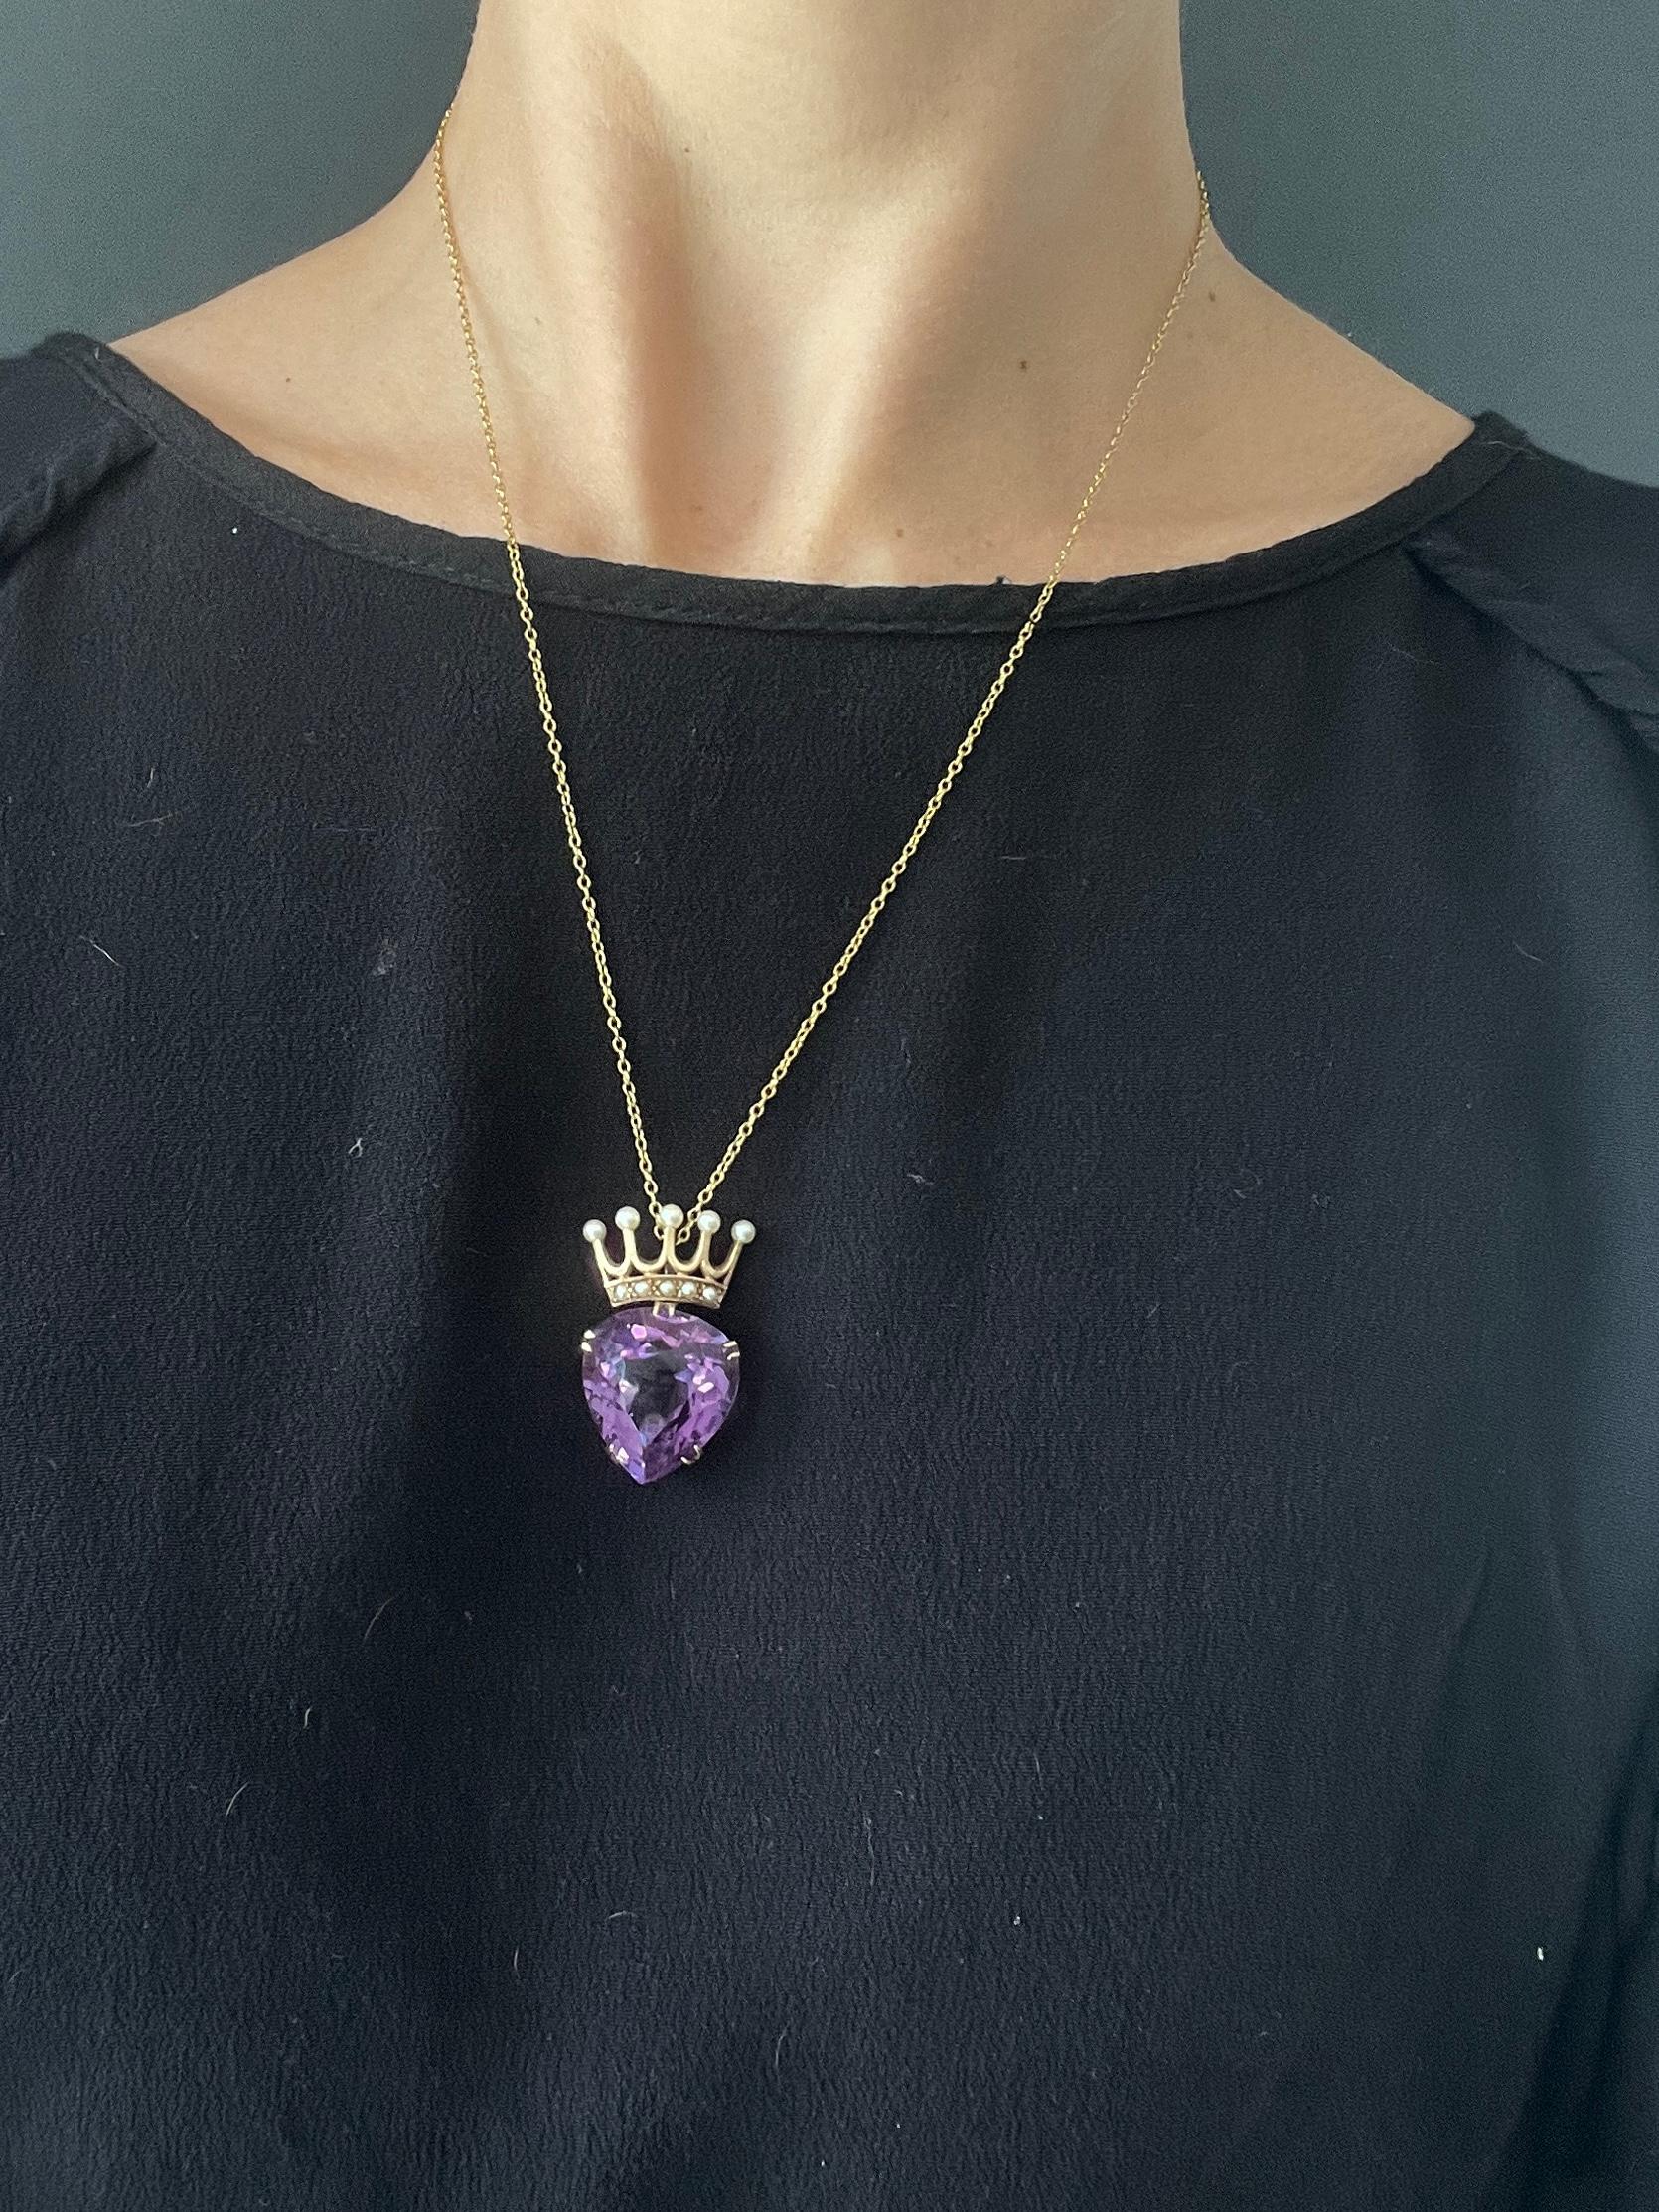 Vintage Luckenbooth Amethyst and 9 Carat Gold Pendant Necklace In Good Condition For Sale In Chipping Campden, GB